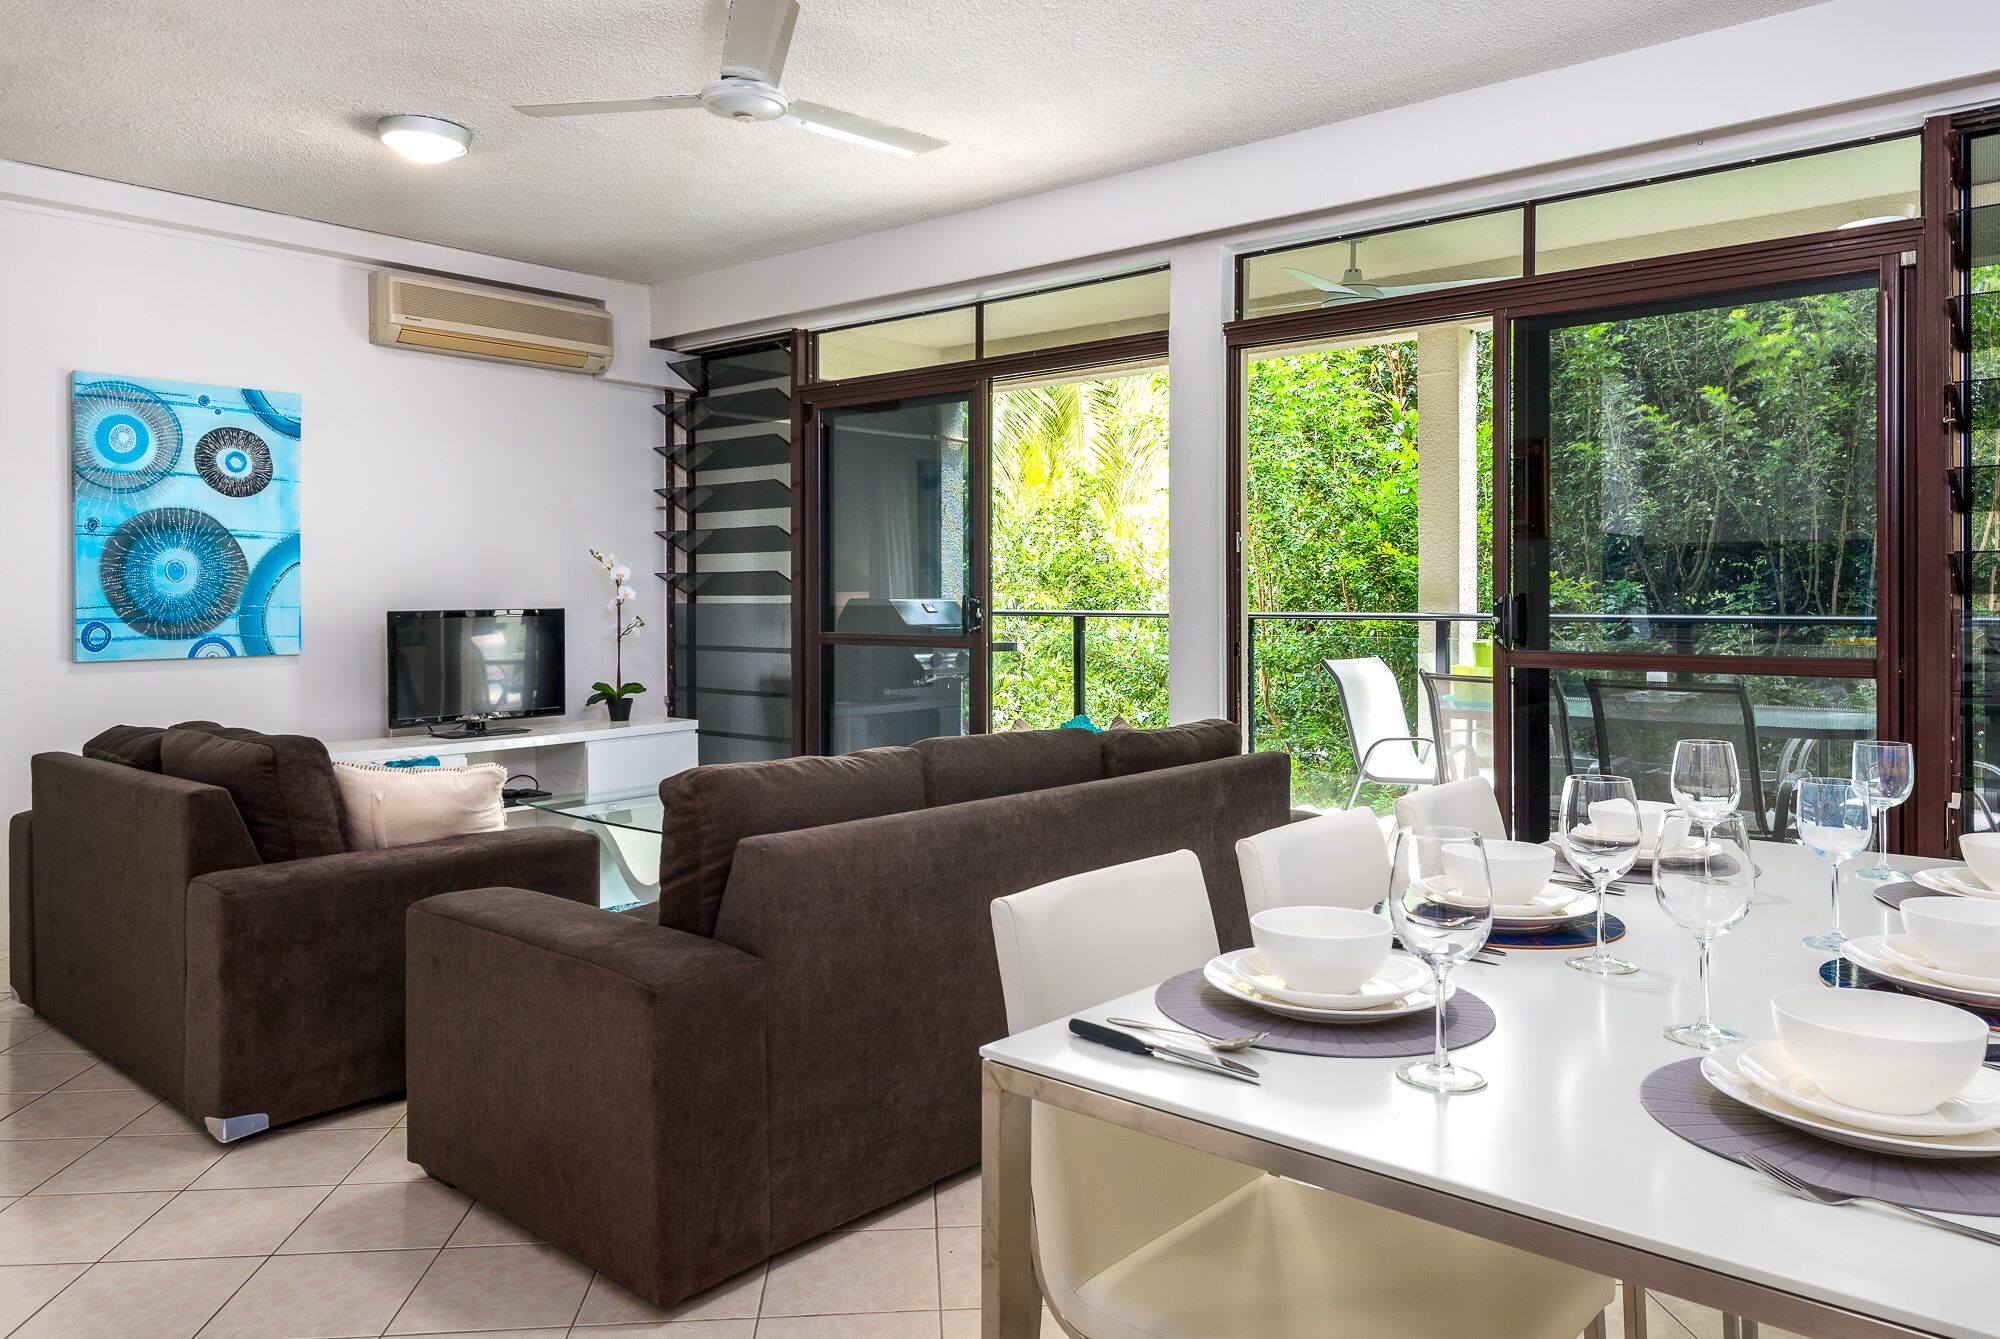 Tranquility Chill at Palm Cove - The Ideal Family Accommodation